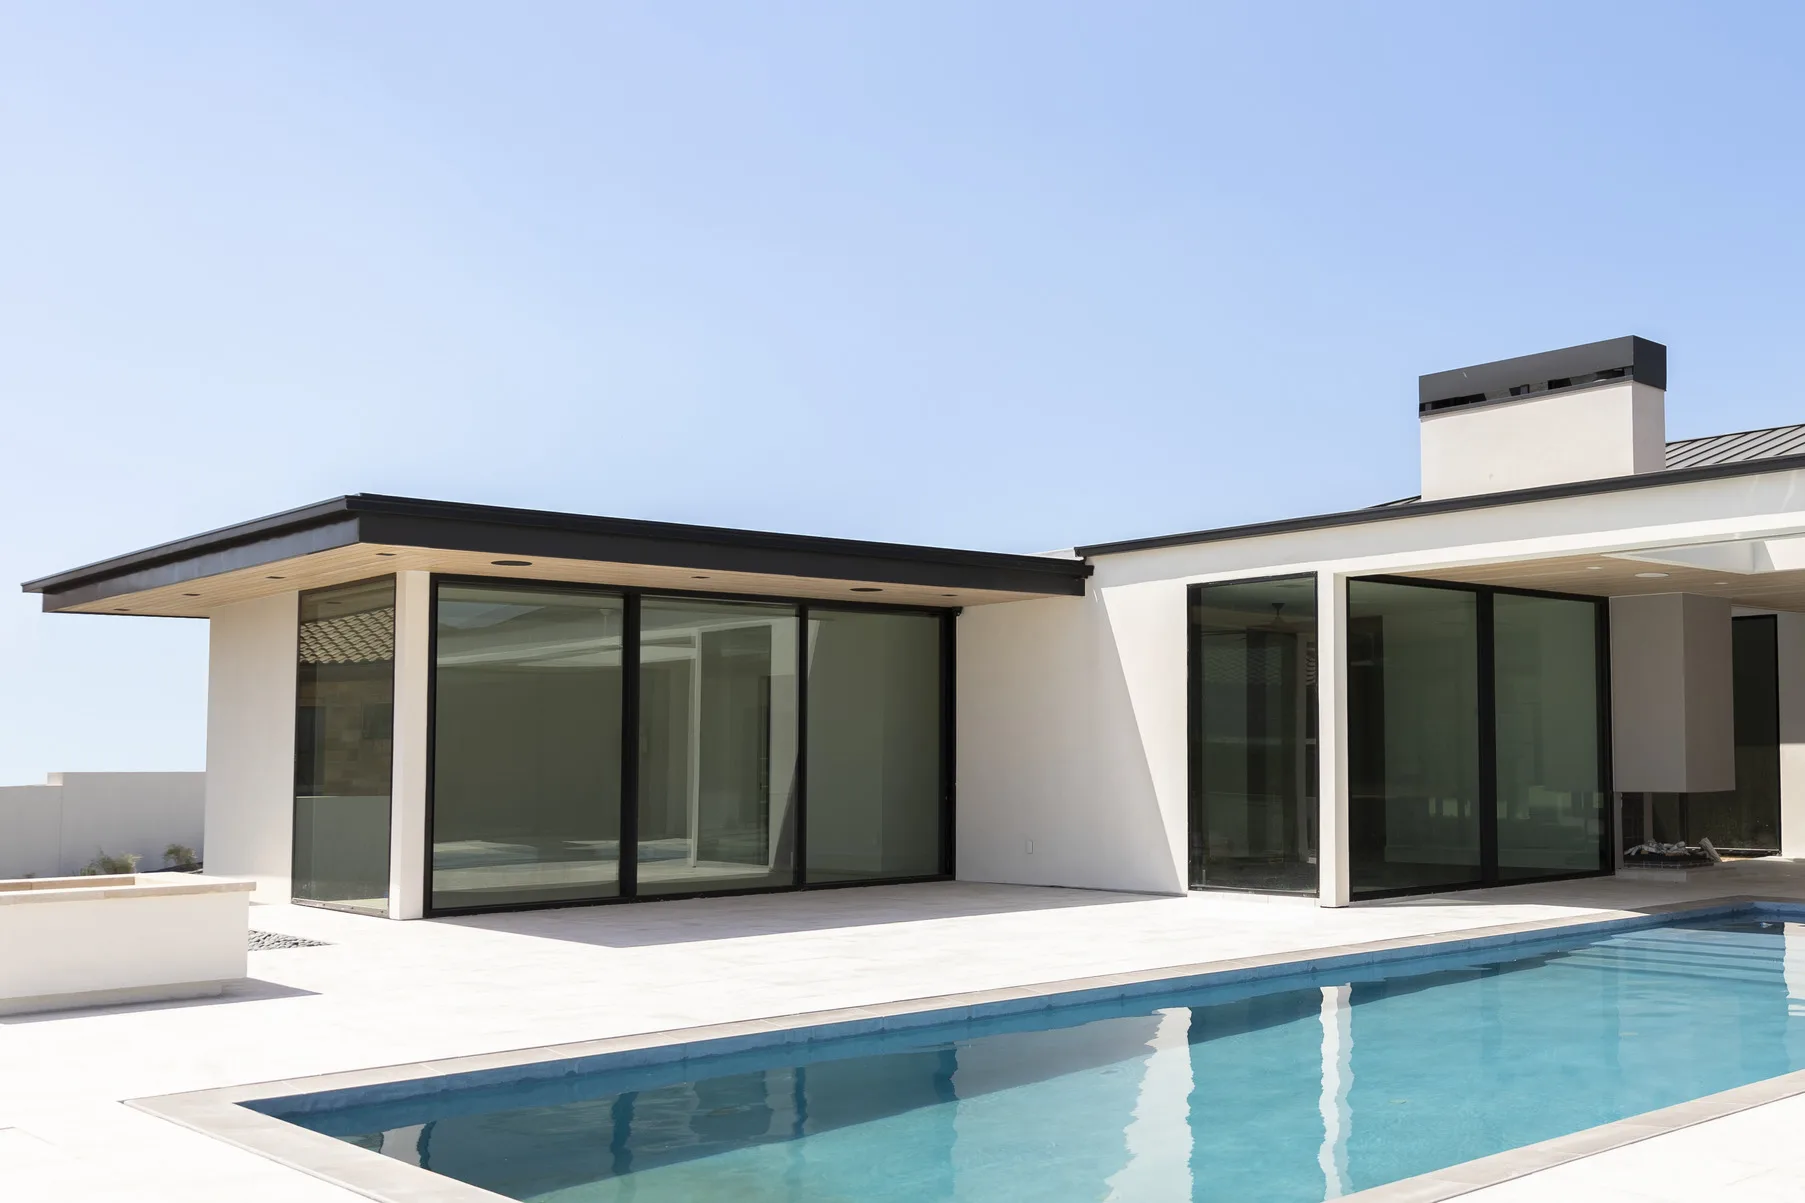 Luxview Sliding Doors and Windows Near Pool